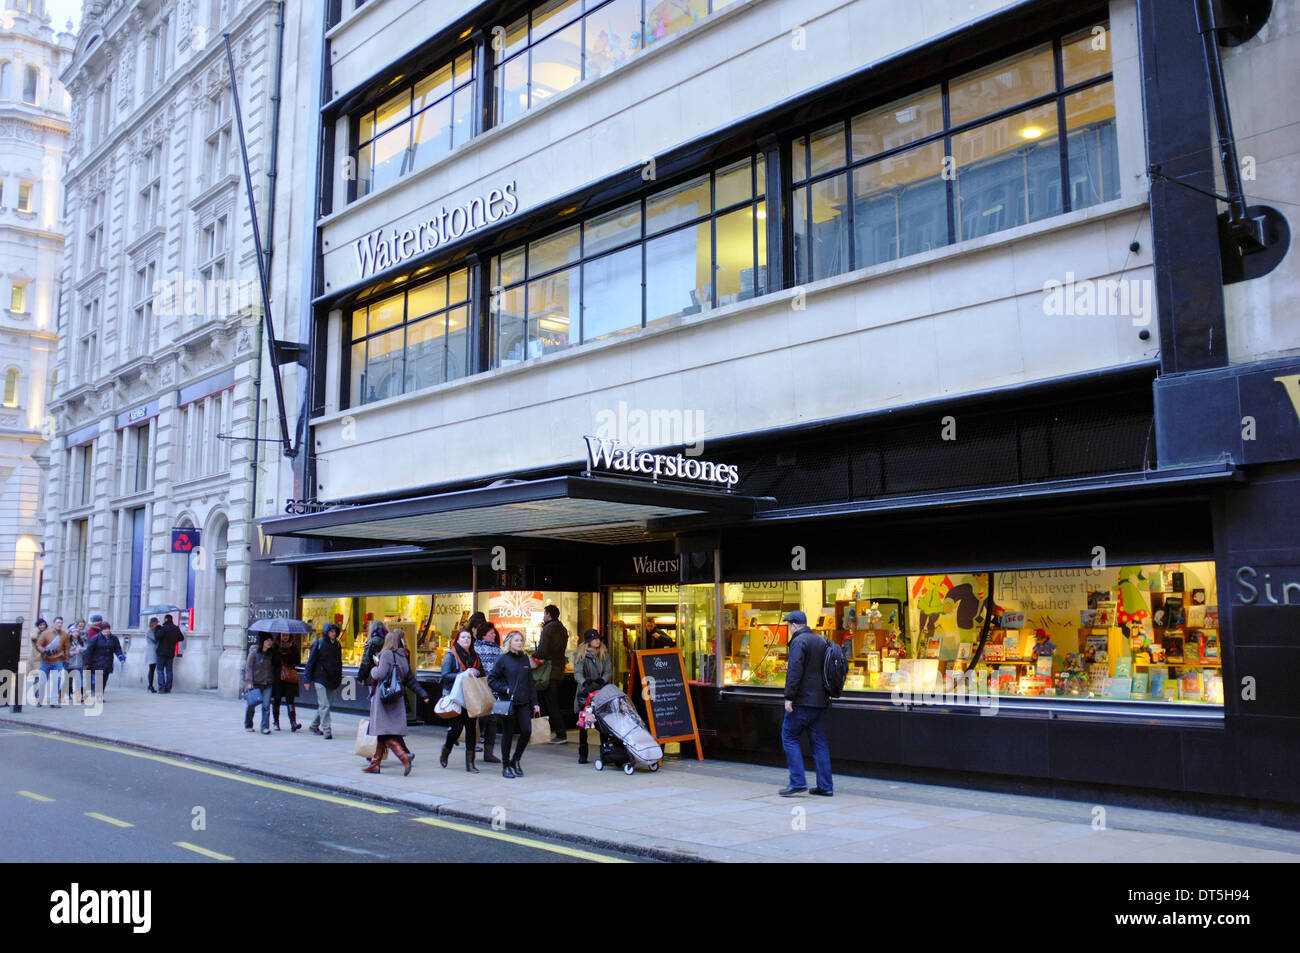 Waterstones book shop, Piccadilly, Londra Foto Stock